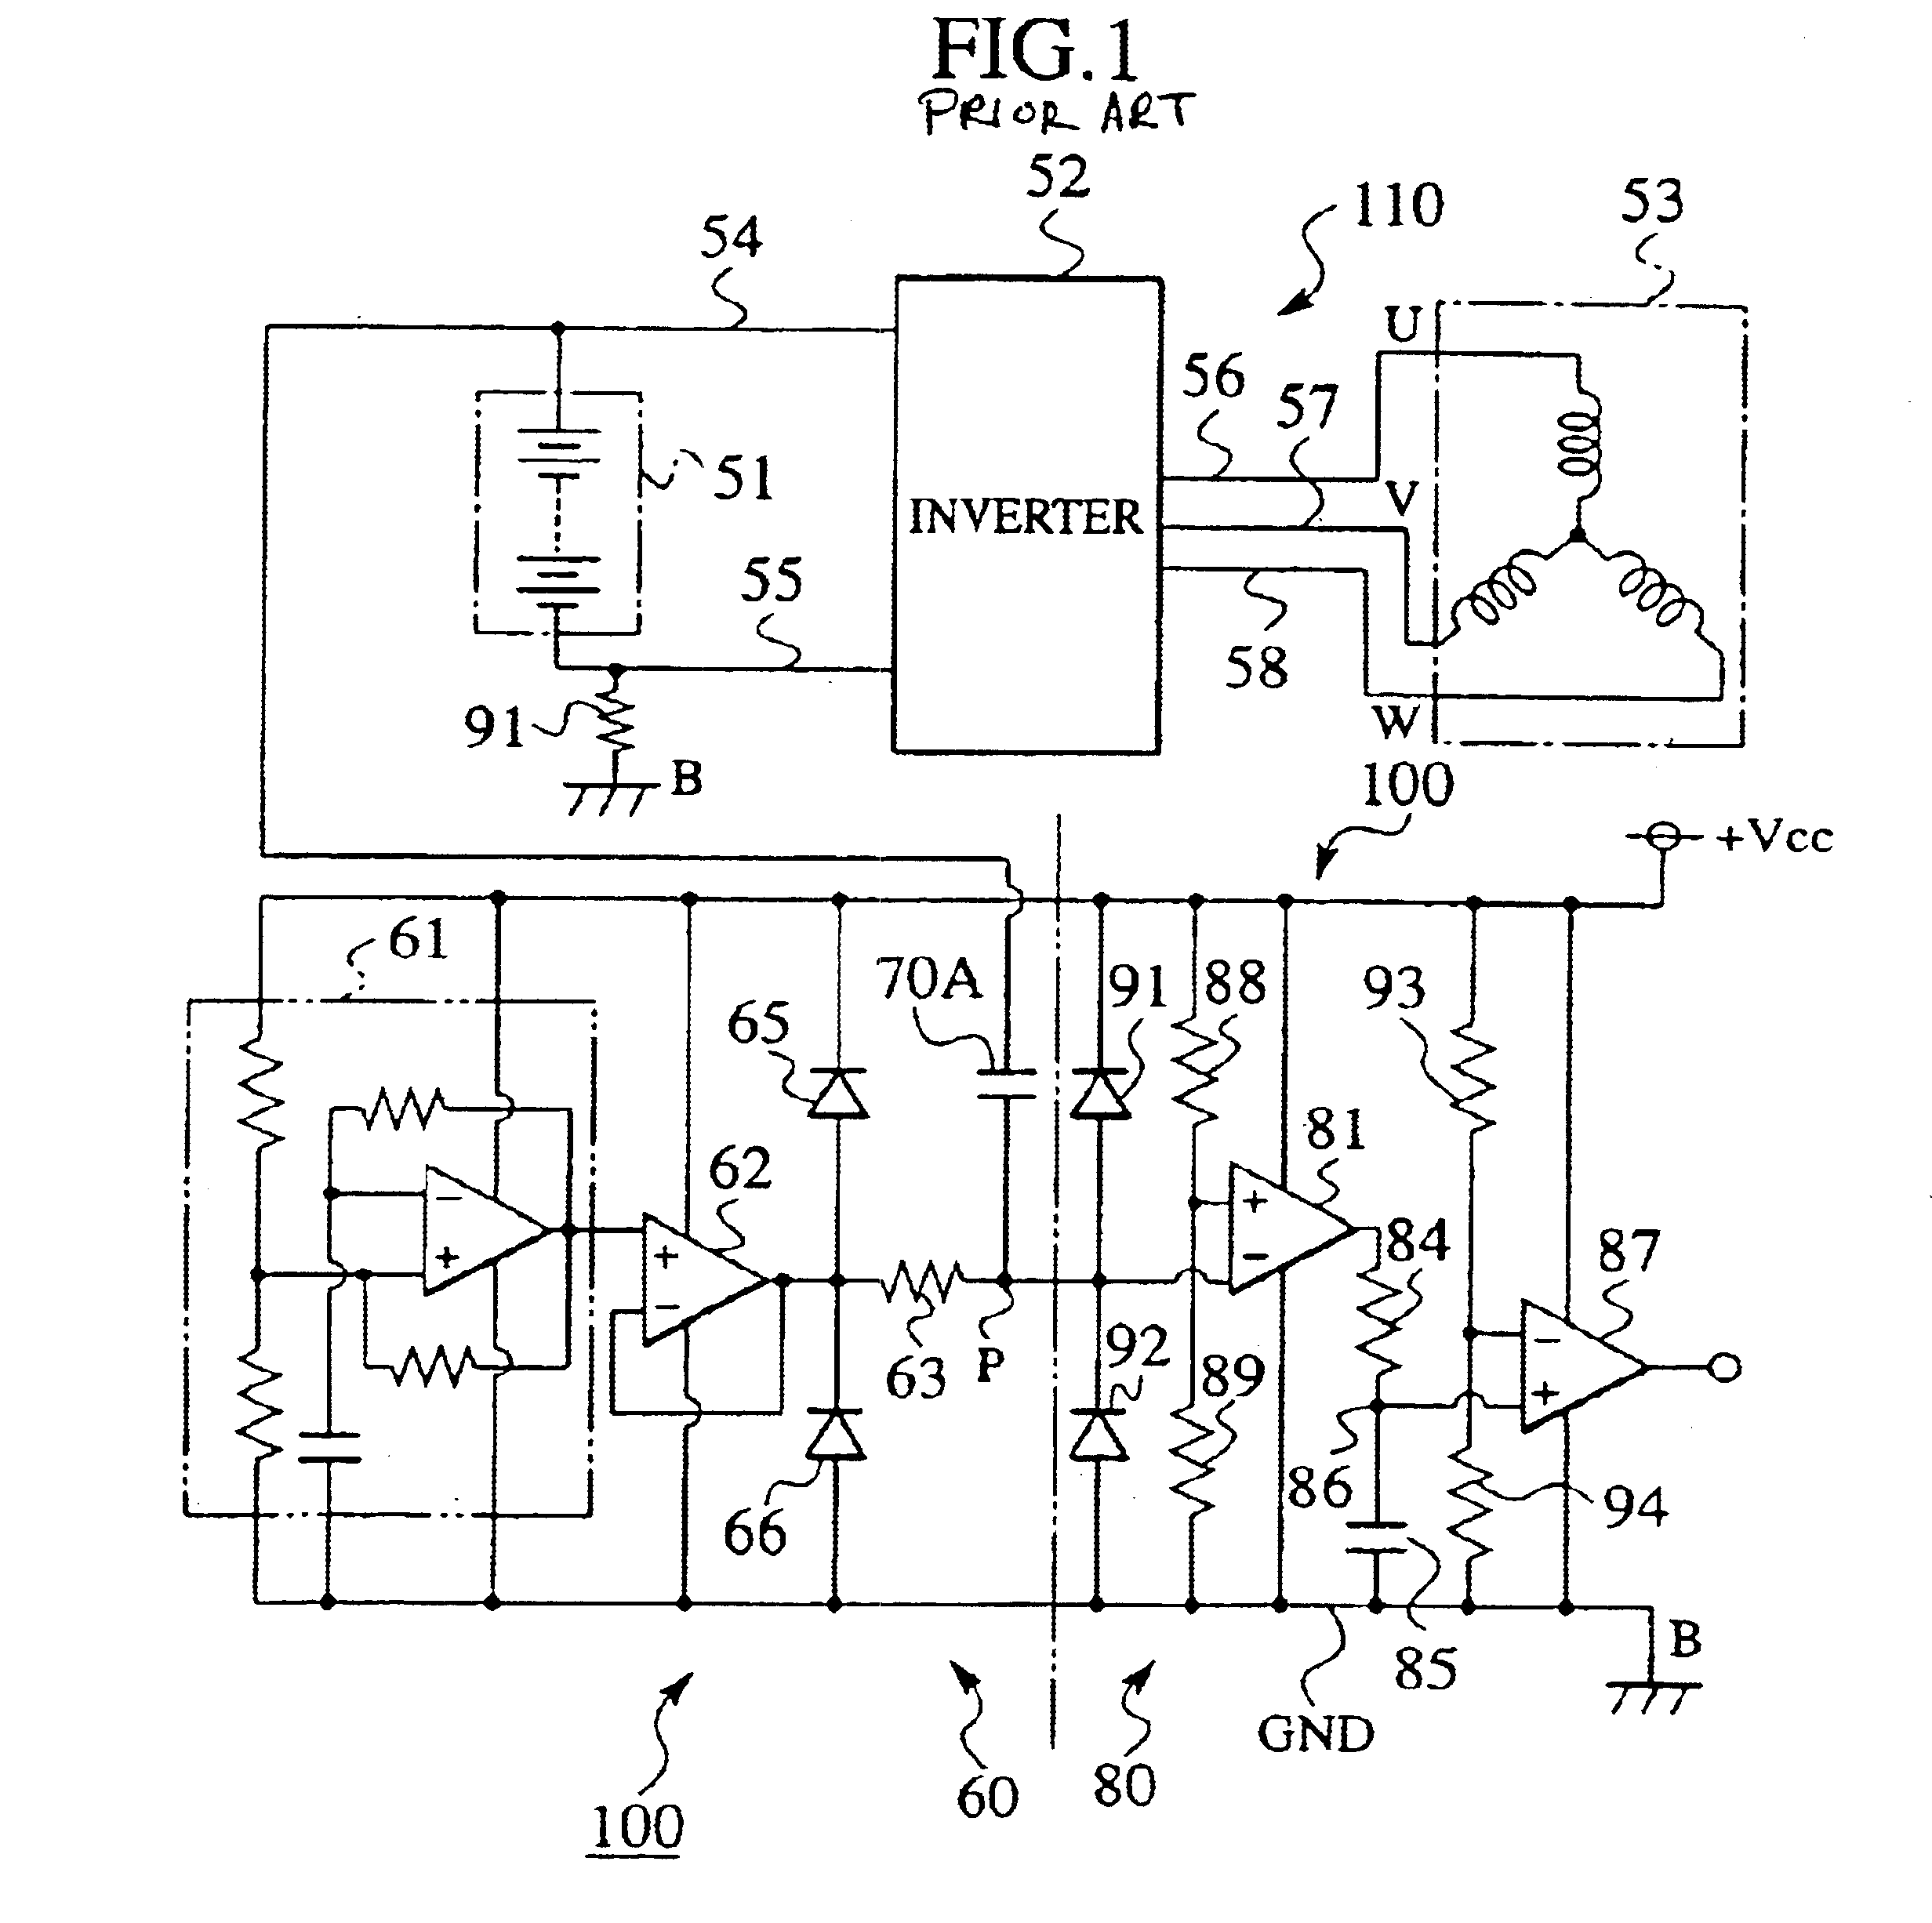 Ground detection apparatus for electric vehicle